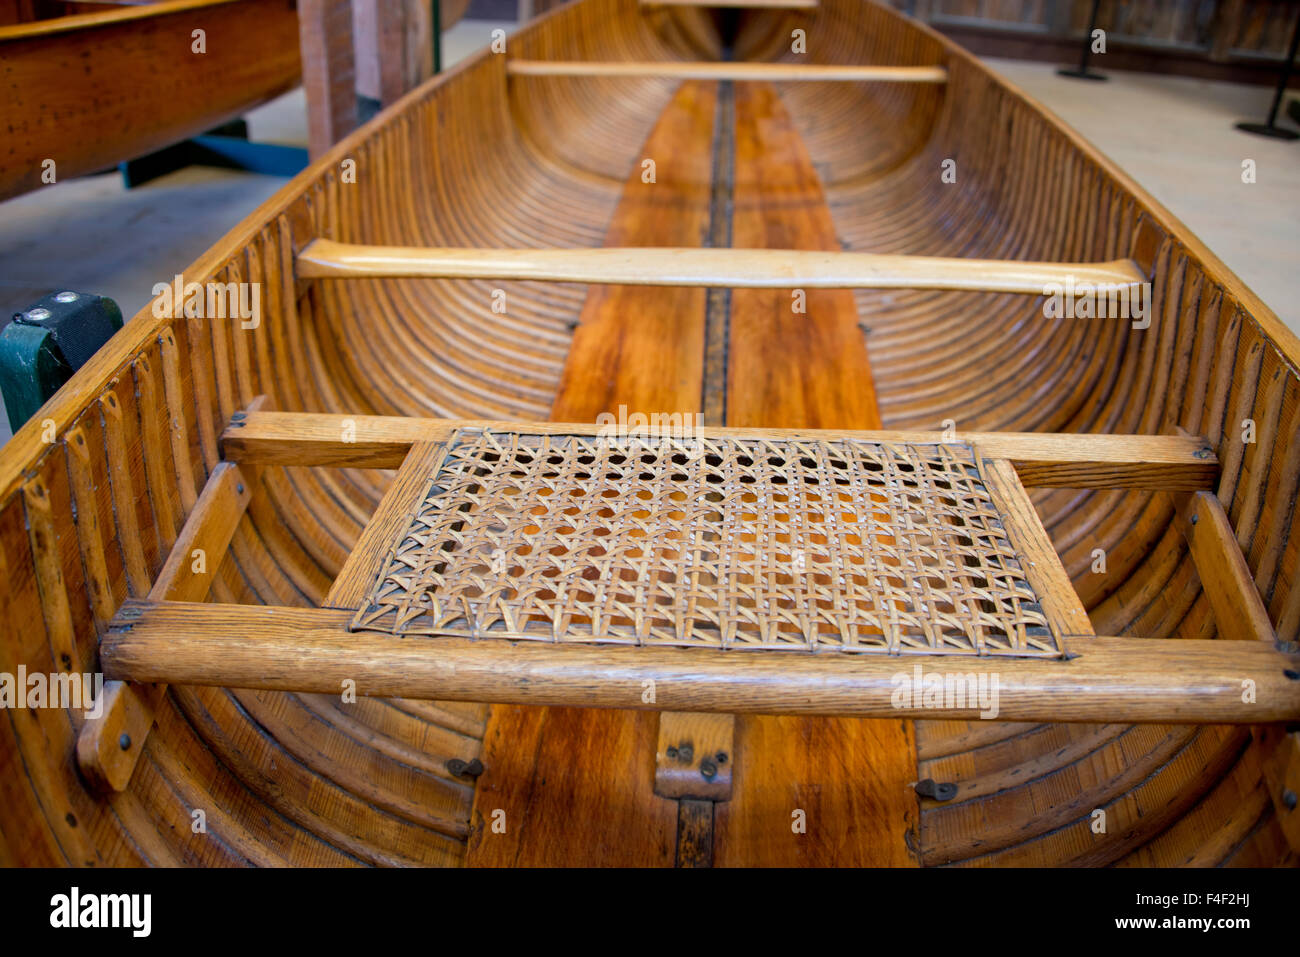 New York, Clayton. Antique Boat Museum.16 foot vintage 